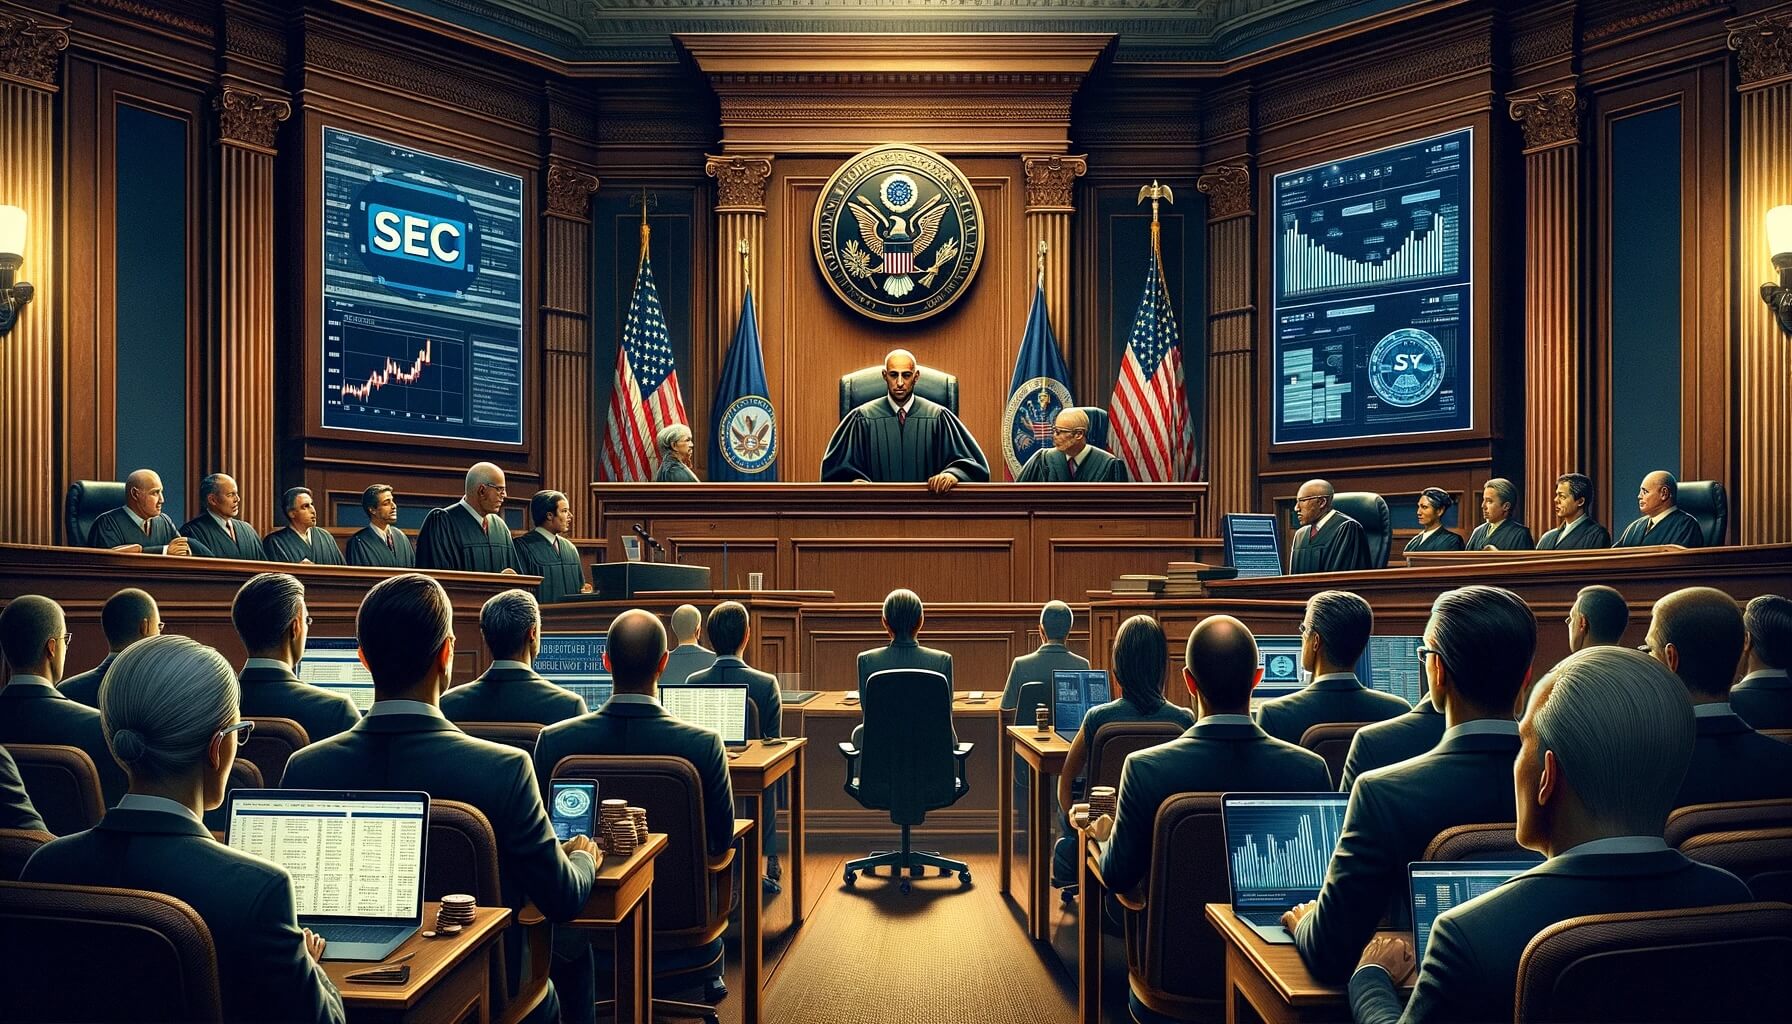 DALL%C2%B7E 2023 12 15 14.53.20 Create a landscape oriented hyperrealistic cover image of a U.S. courtroom scene focusing on a single judge overseeing a case involving the SEC and C